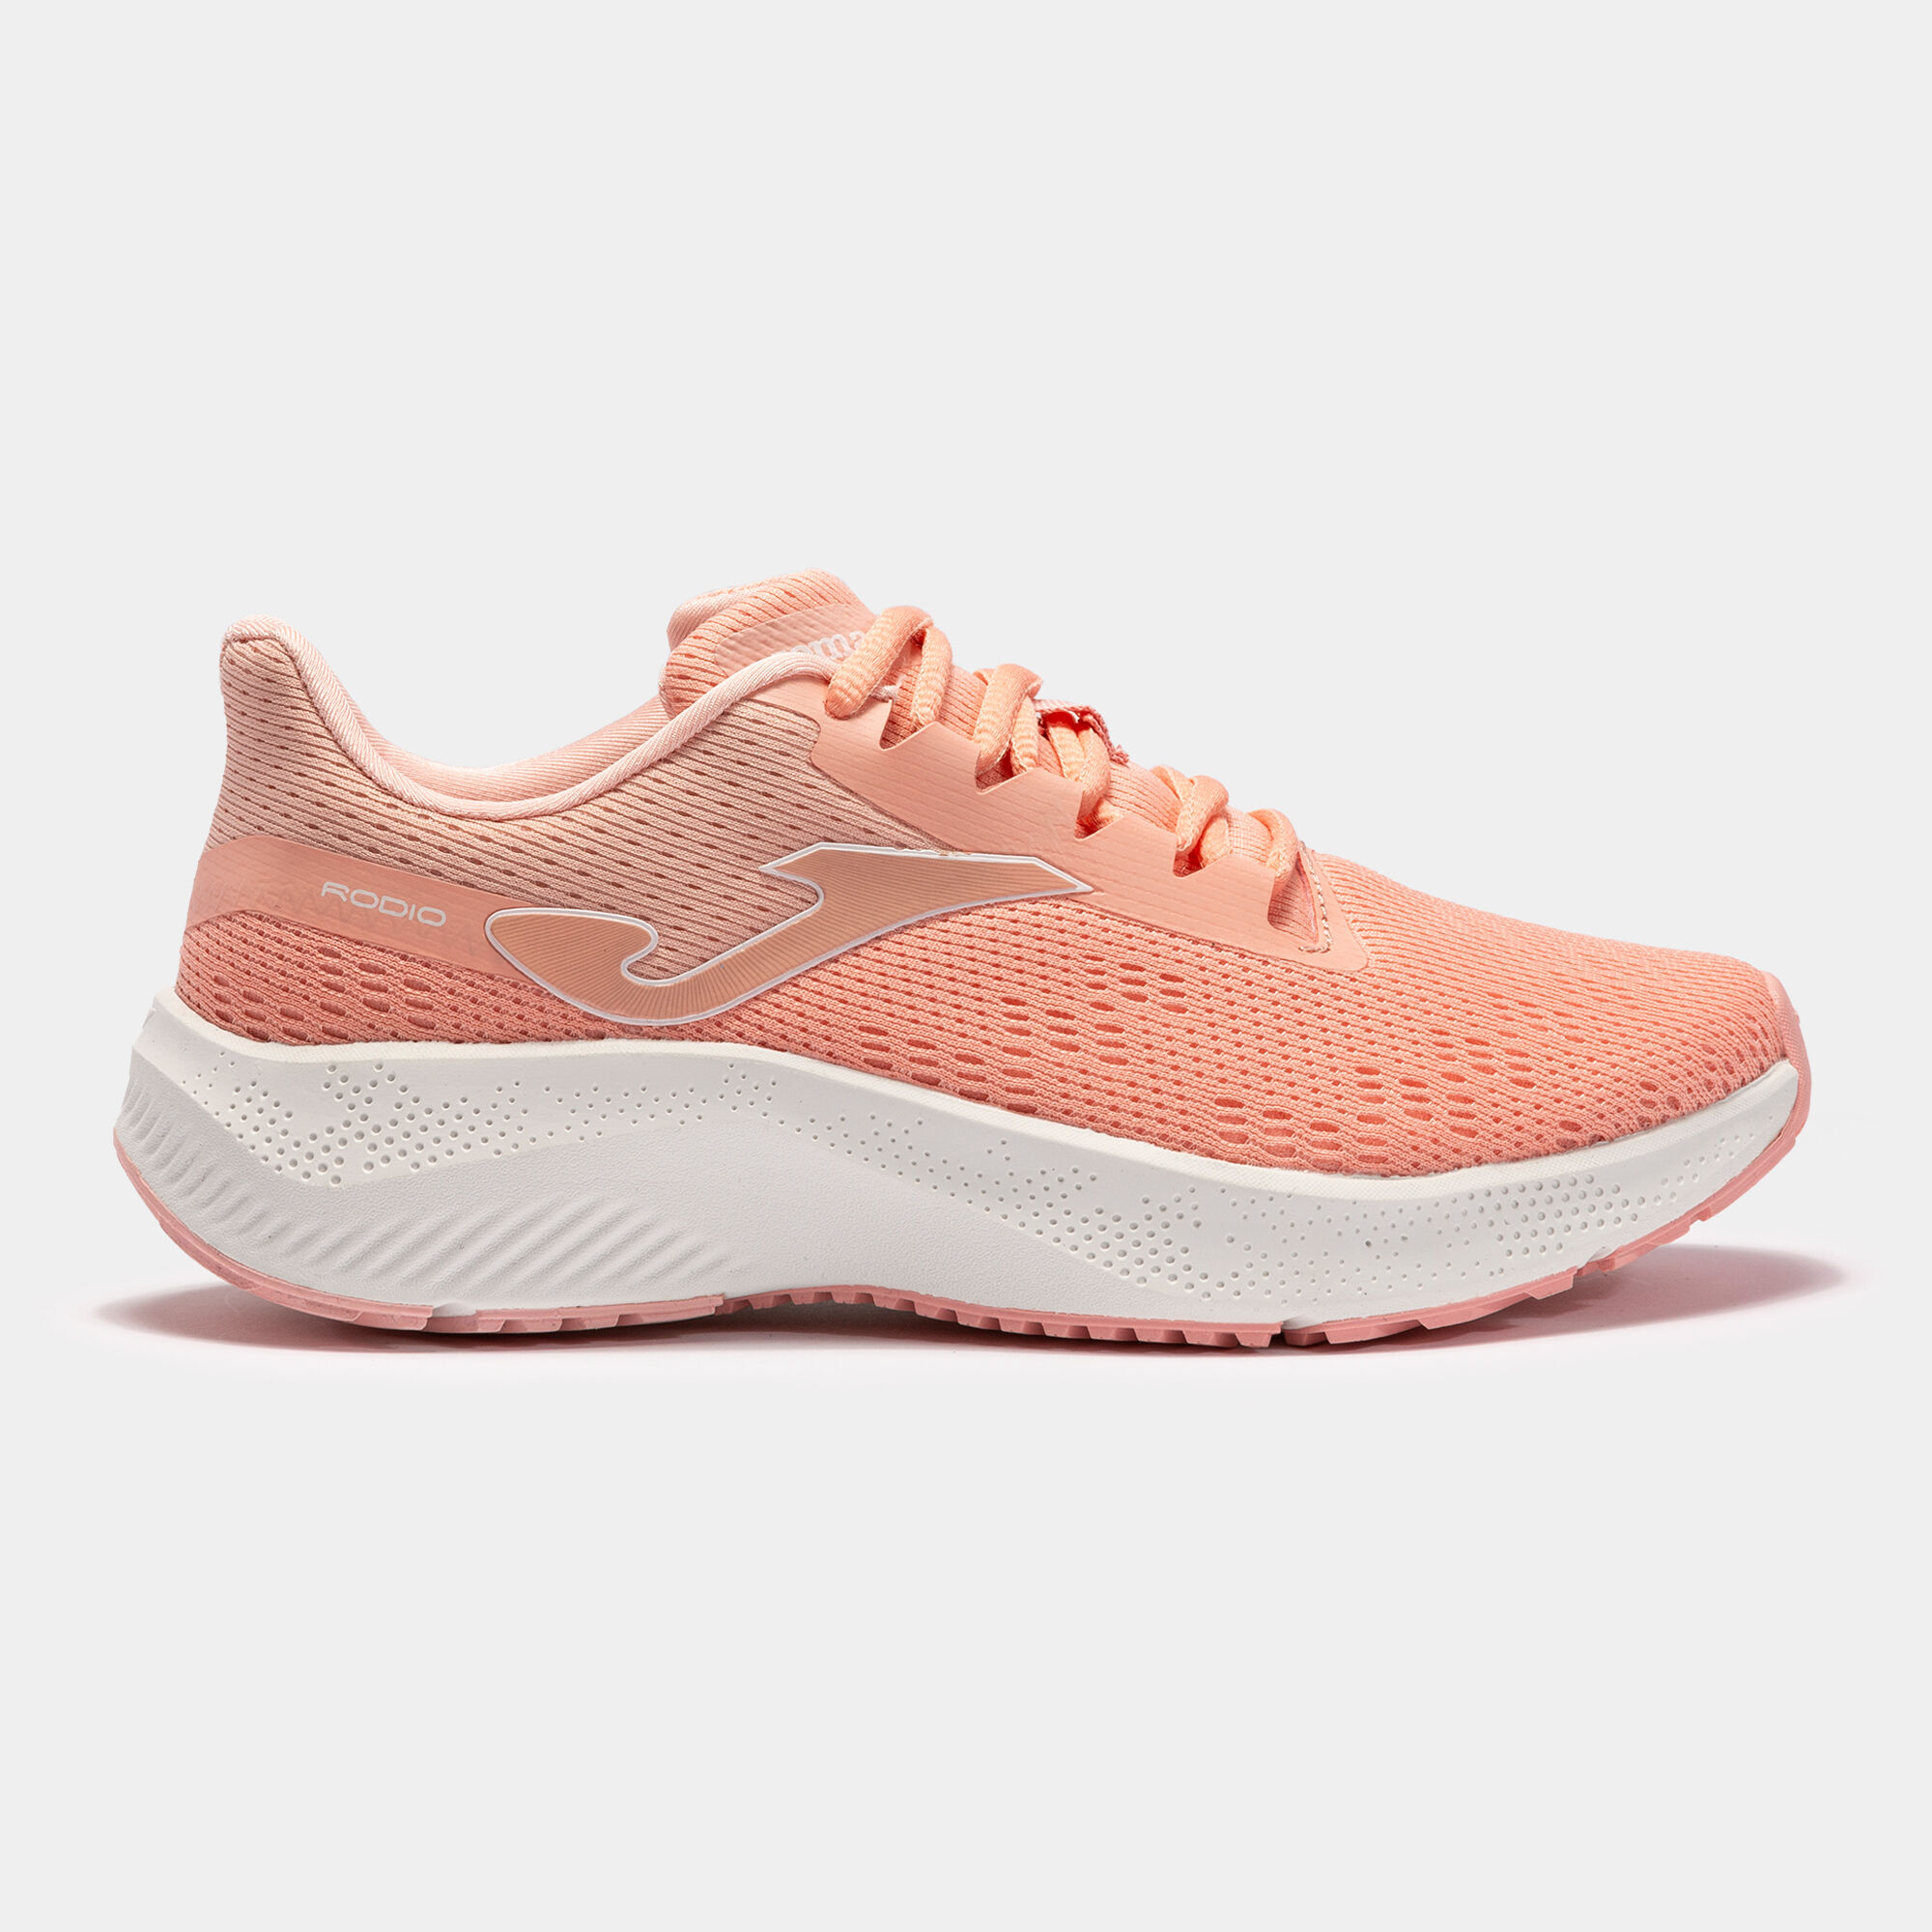 Running shoes Rodio 22 woman coral